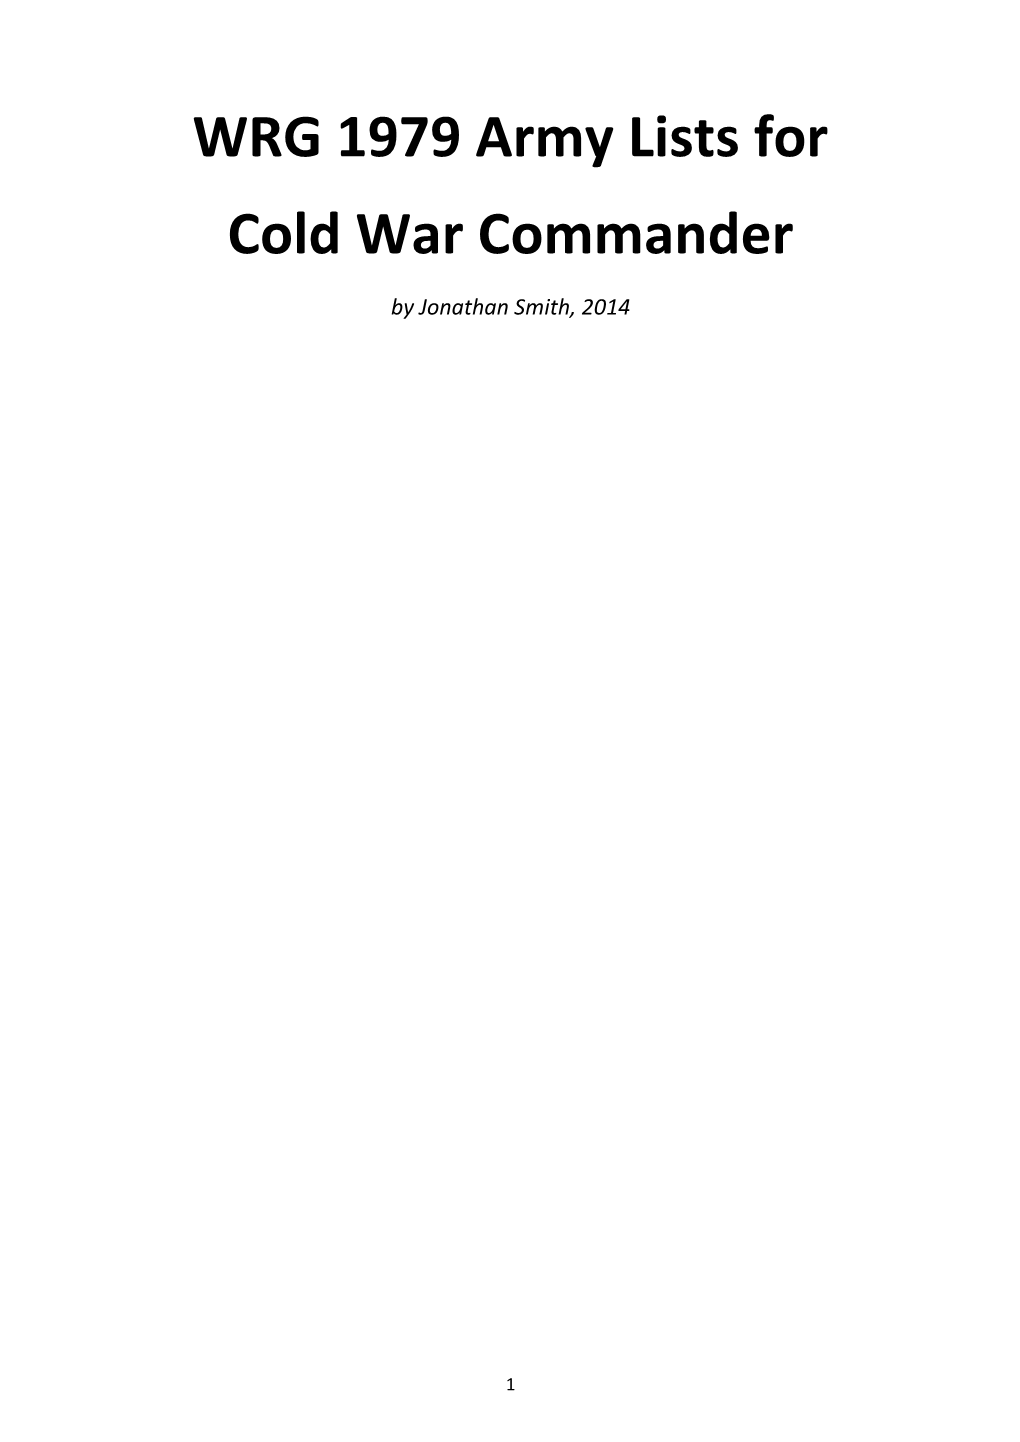 WRG 1979 Army Lists for Cold War Commander